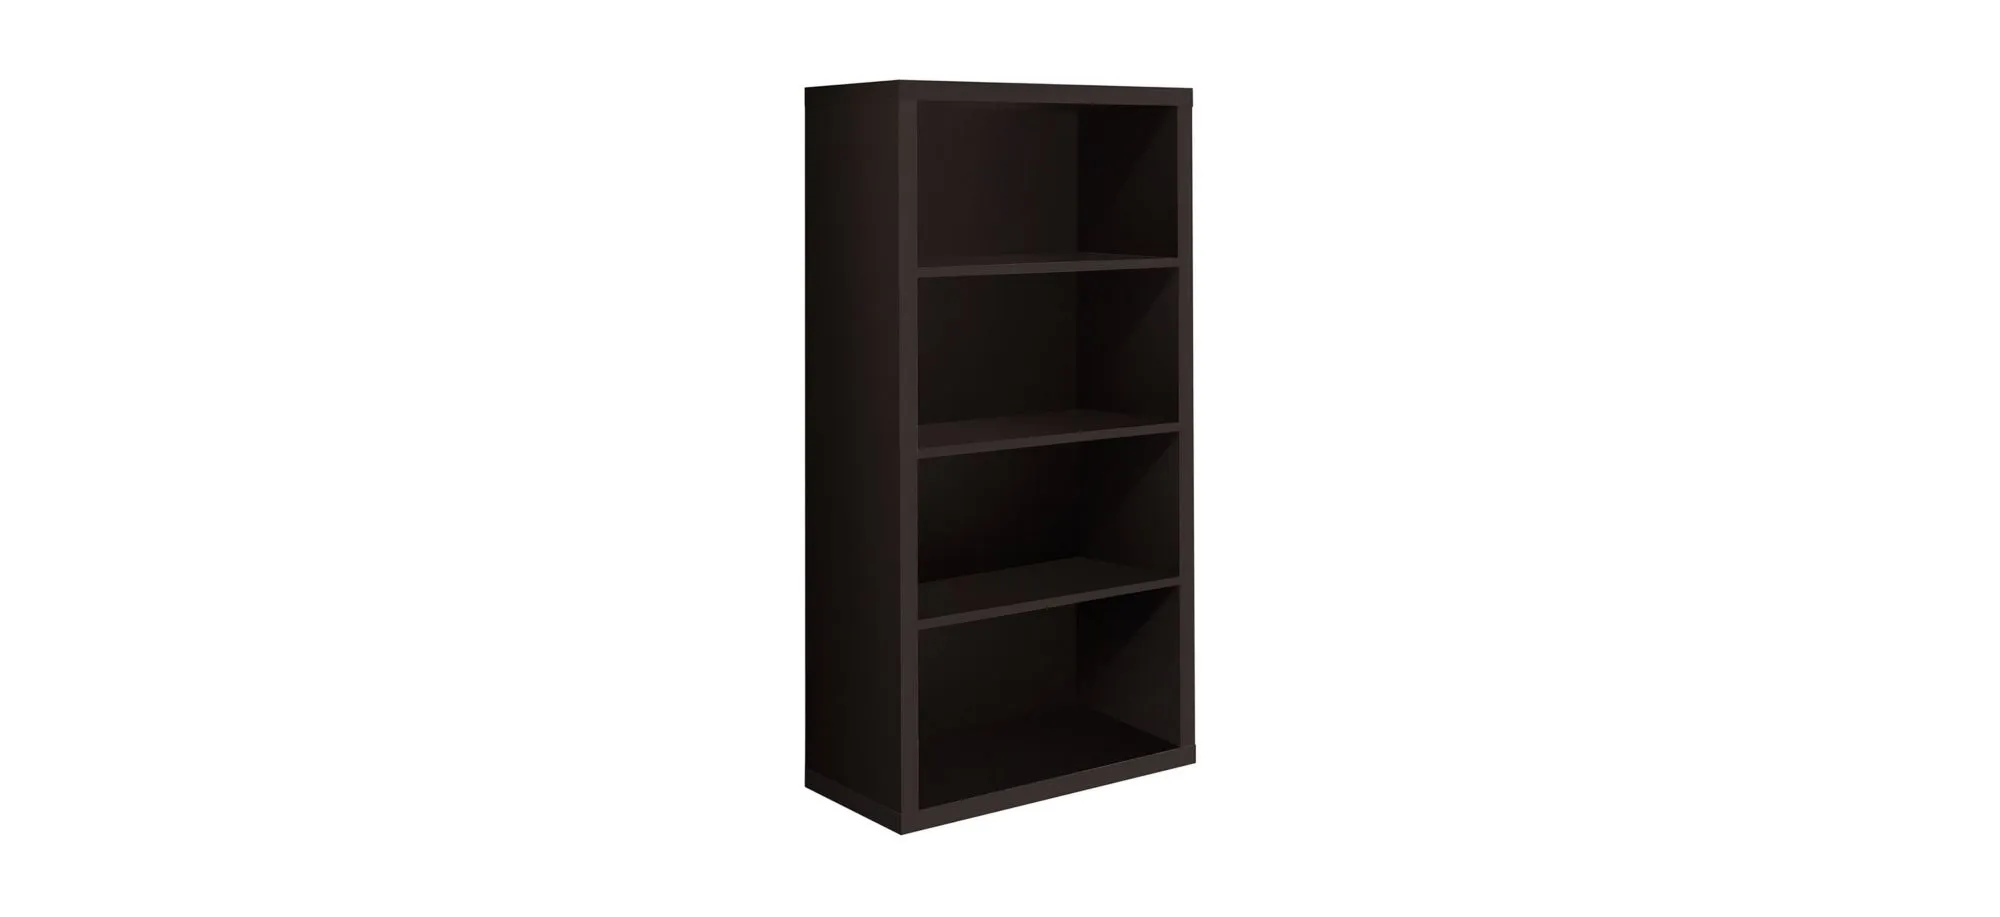 Calliope Bookcase with Adjustable Shelves in Espresso by Monarch Specialties